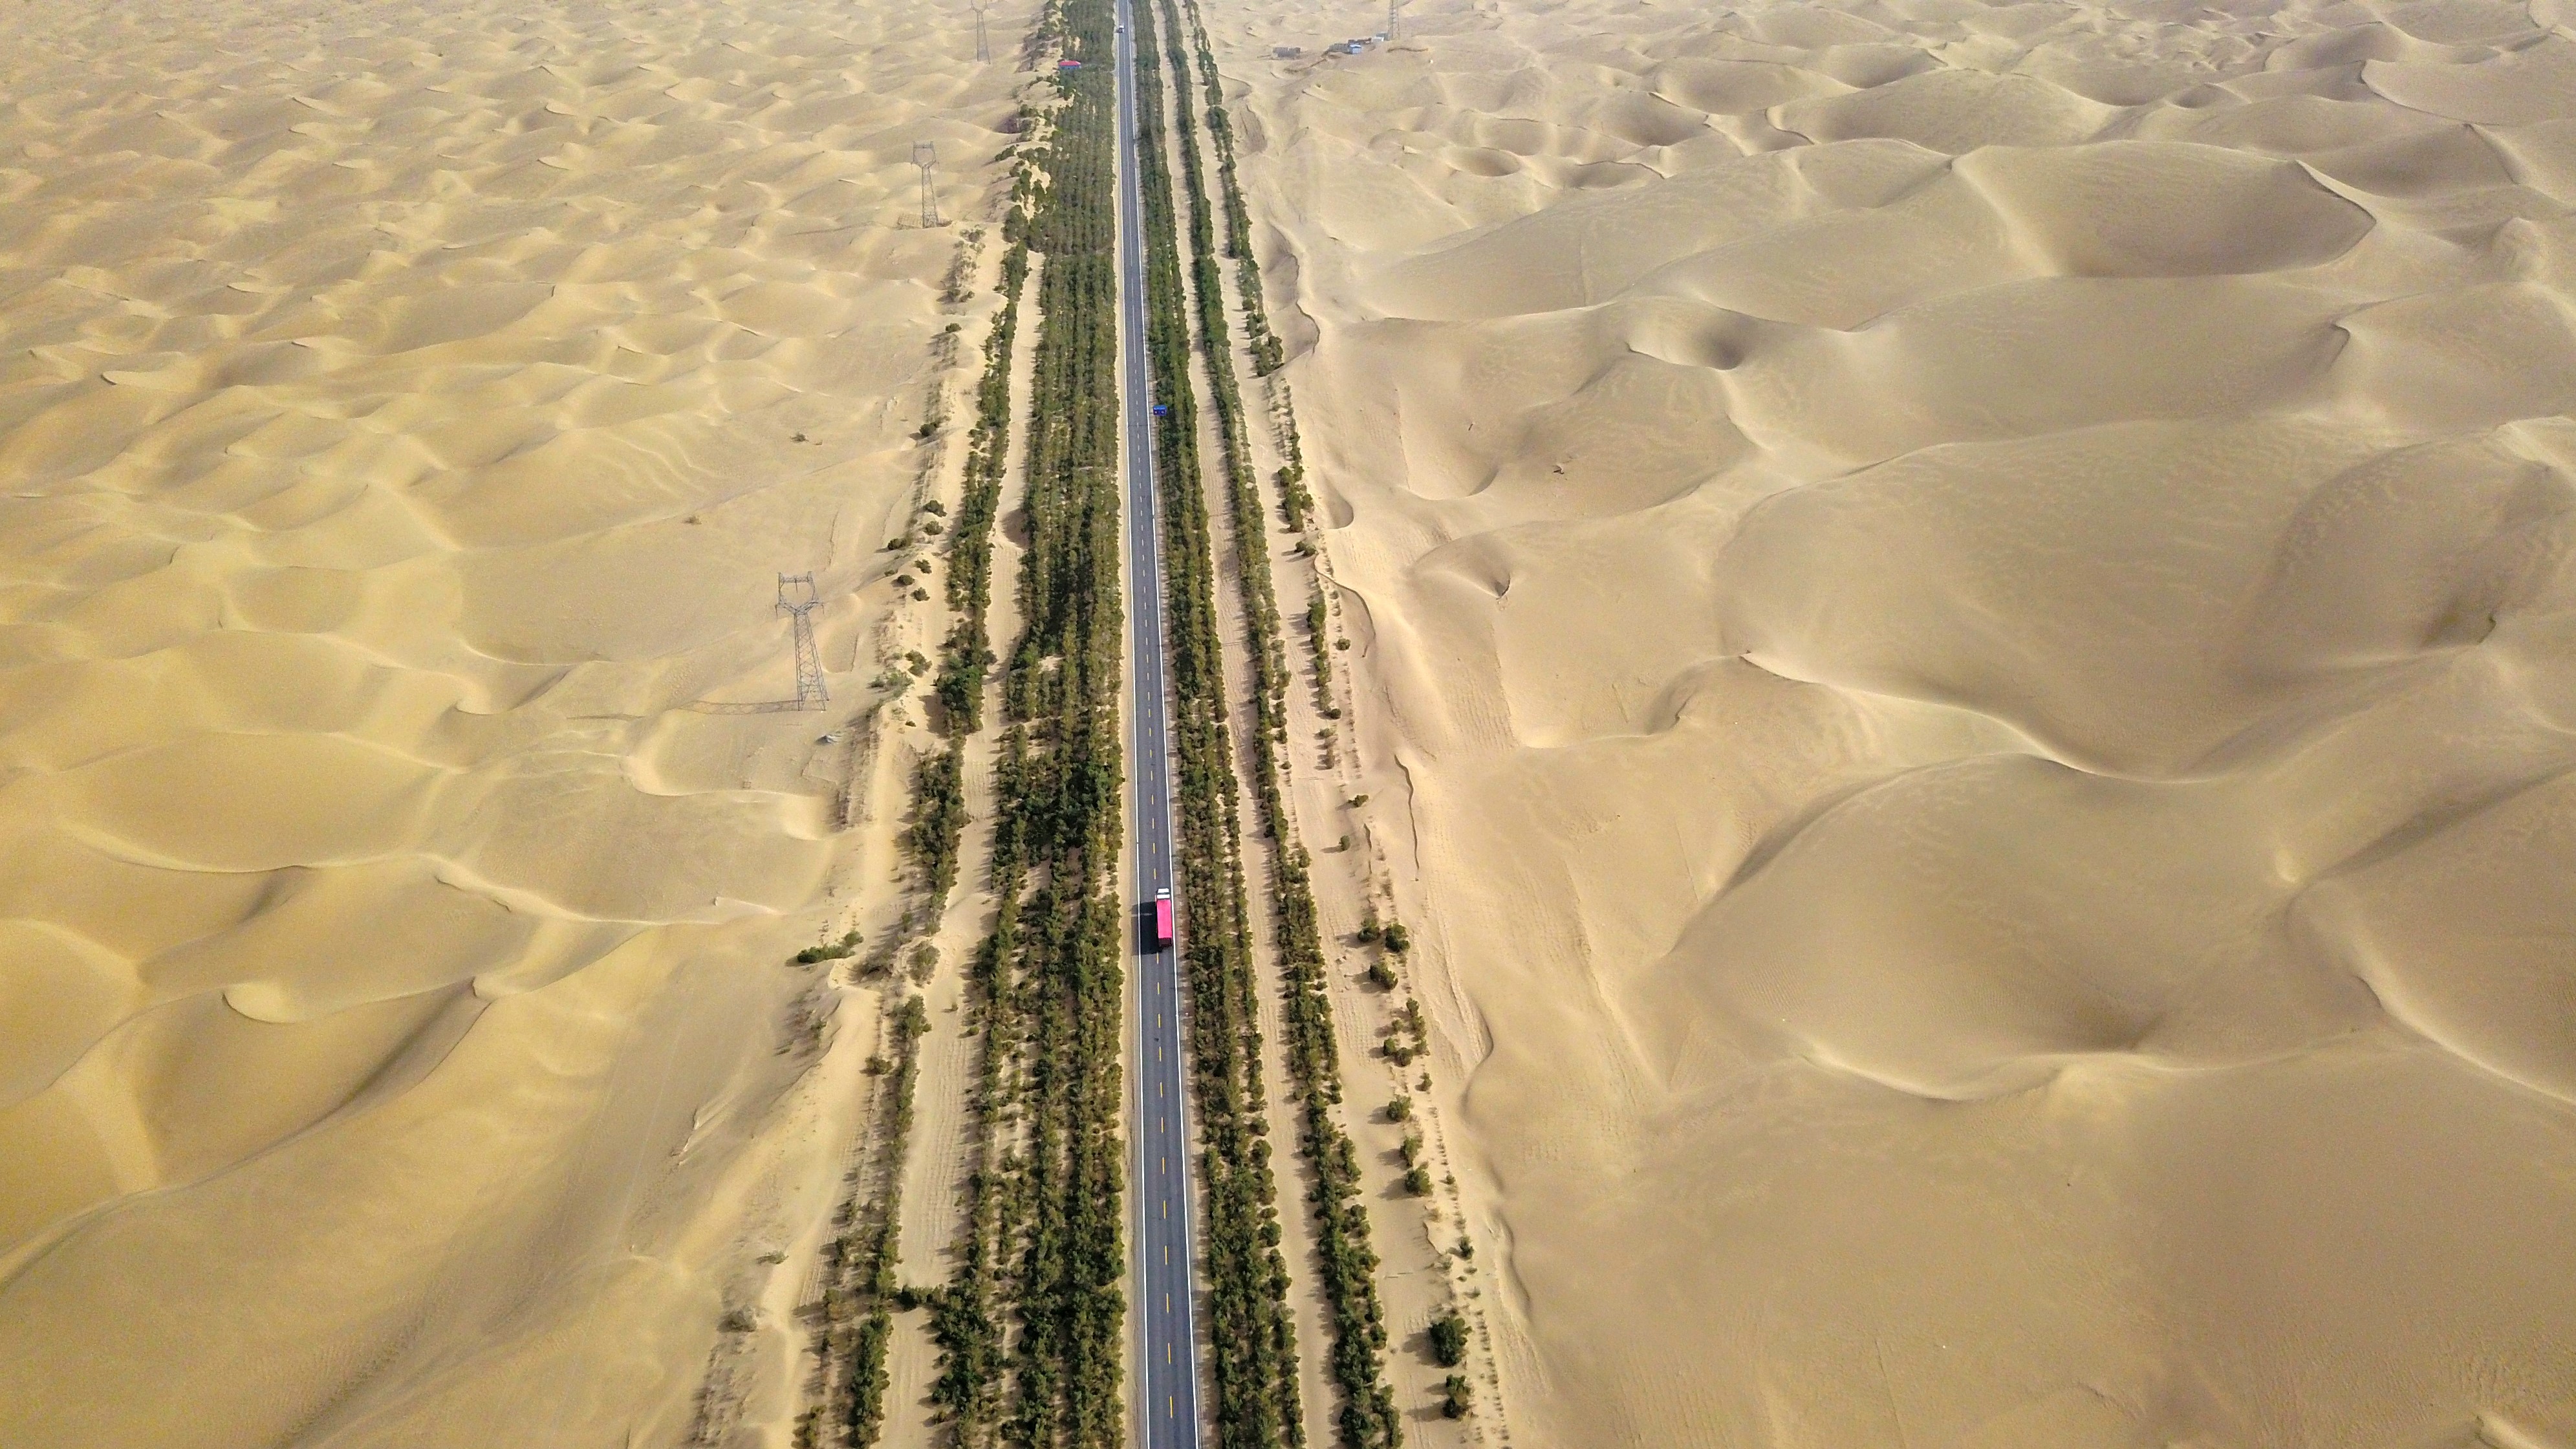 Taklamakan desert, nicknamed the "The Sea of Death", is the second largest shifting sand desert in the world, and a potential site for the waterless reactors.&nbsp;